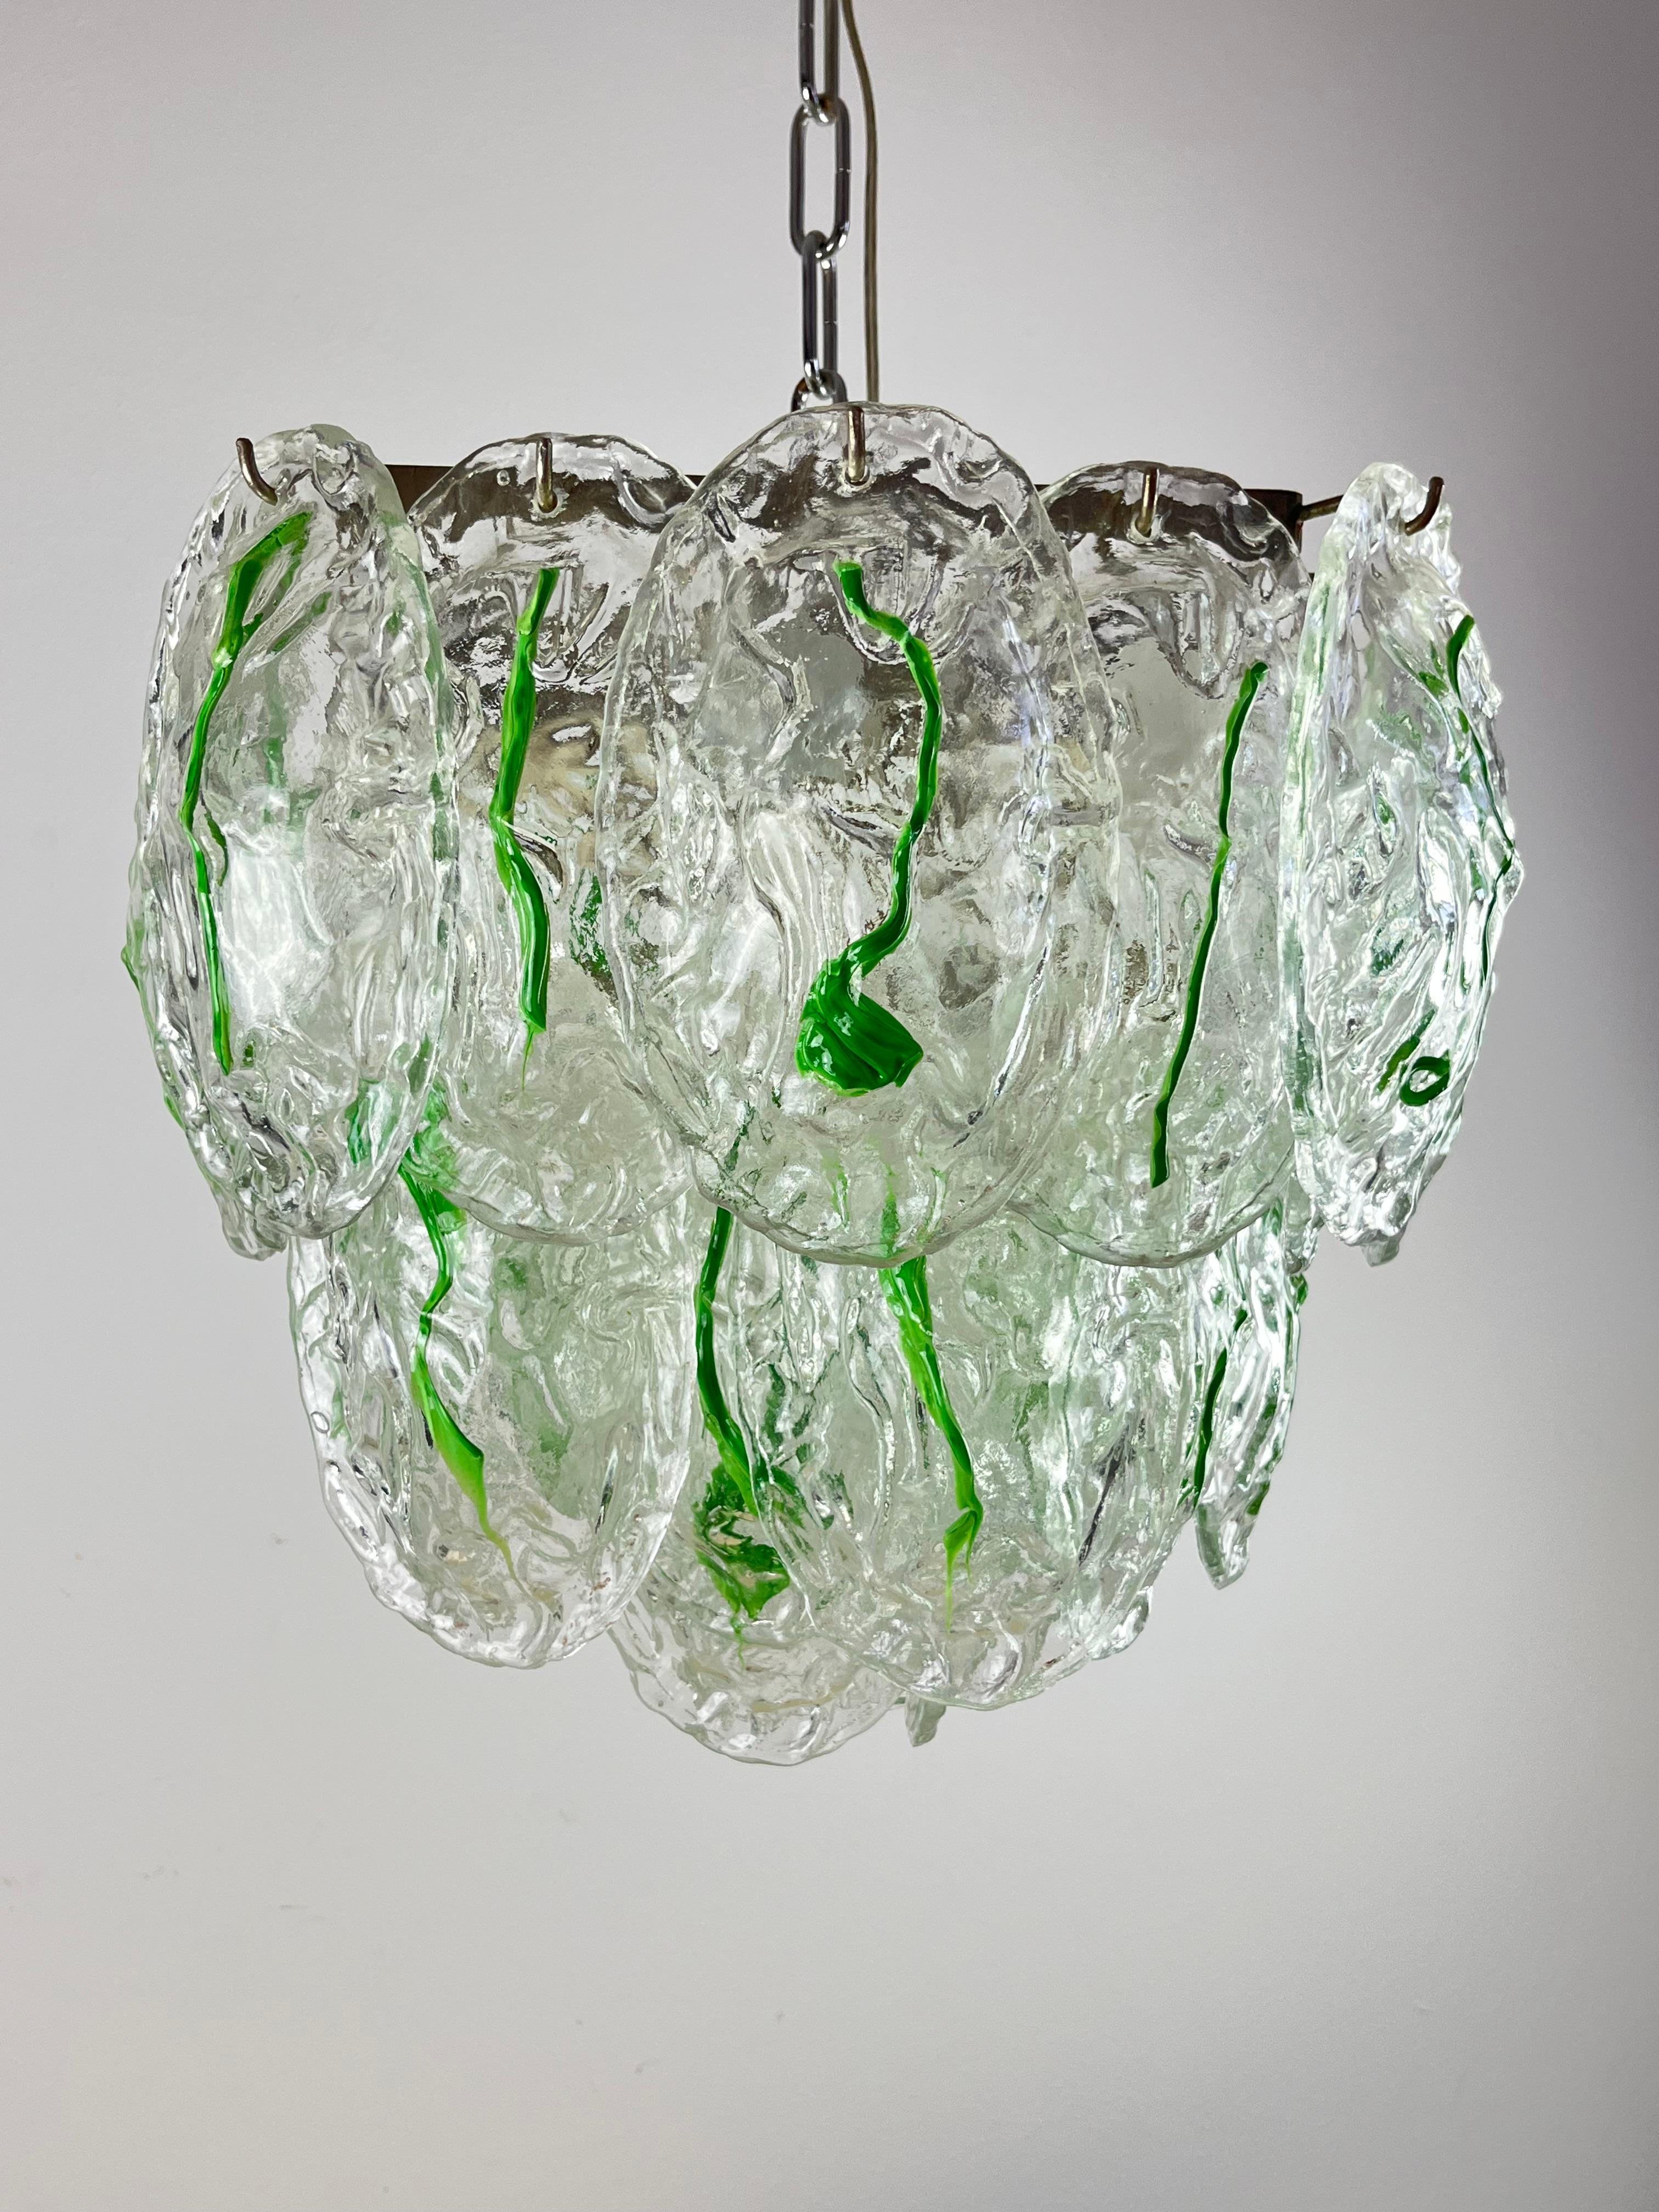 Mid-20th Century Six-light Murano Glass Chandelier by Vistosi, Italy, 1960s For Sale